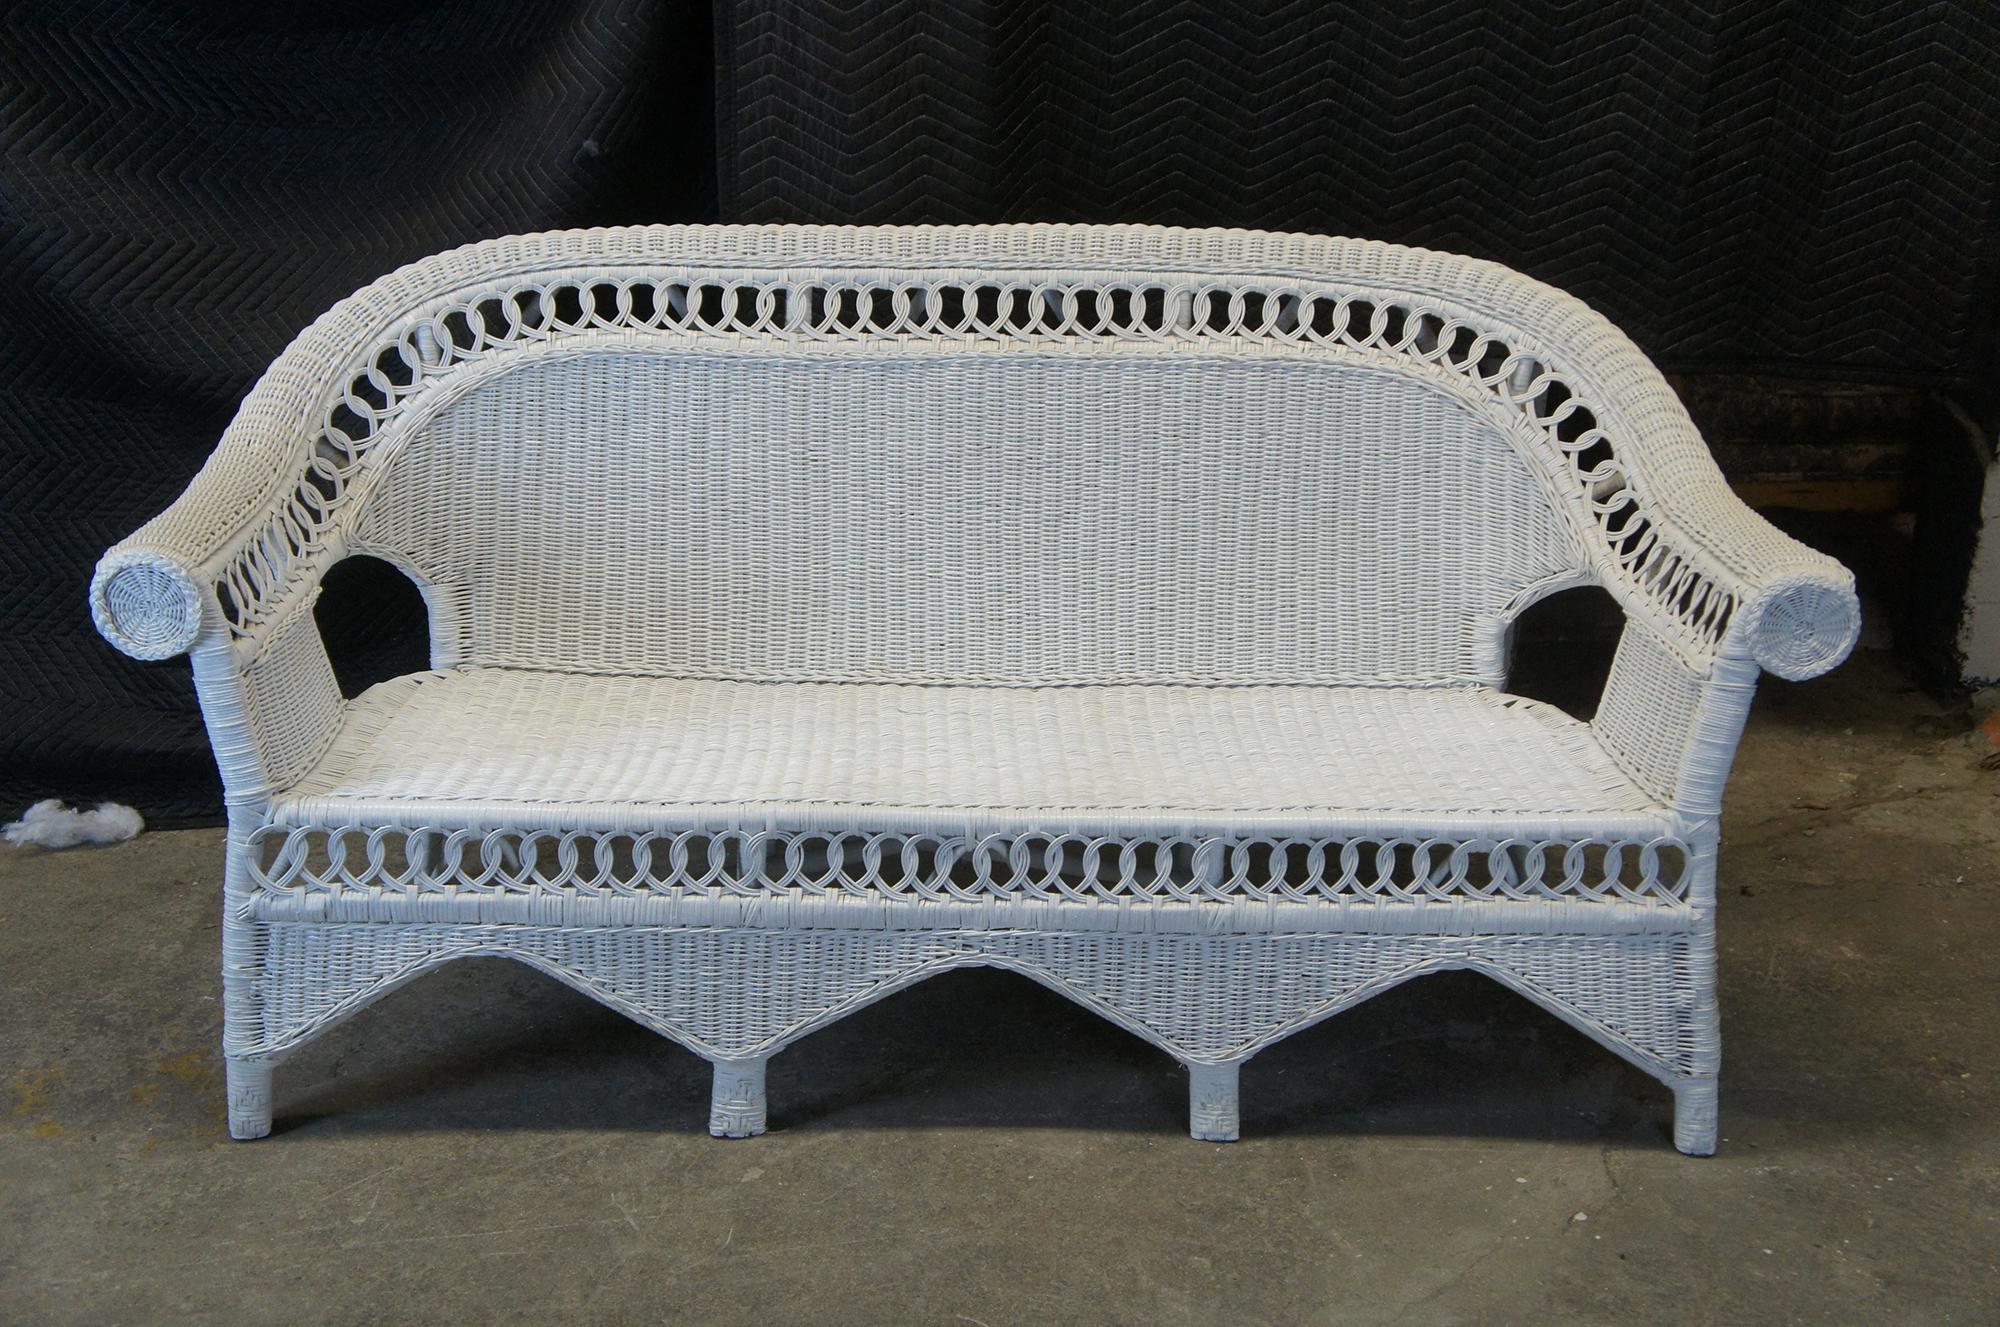 Upholstery Victorian Revival White Wicker Rattan Rolled Arm Sofa Settee Love Seat Boho Chic